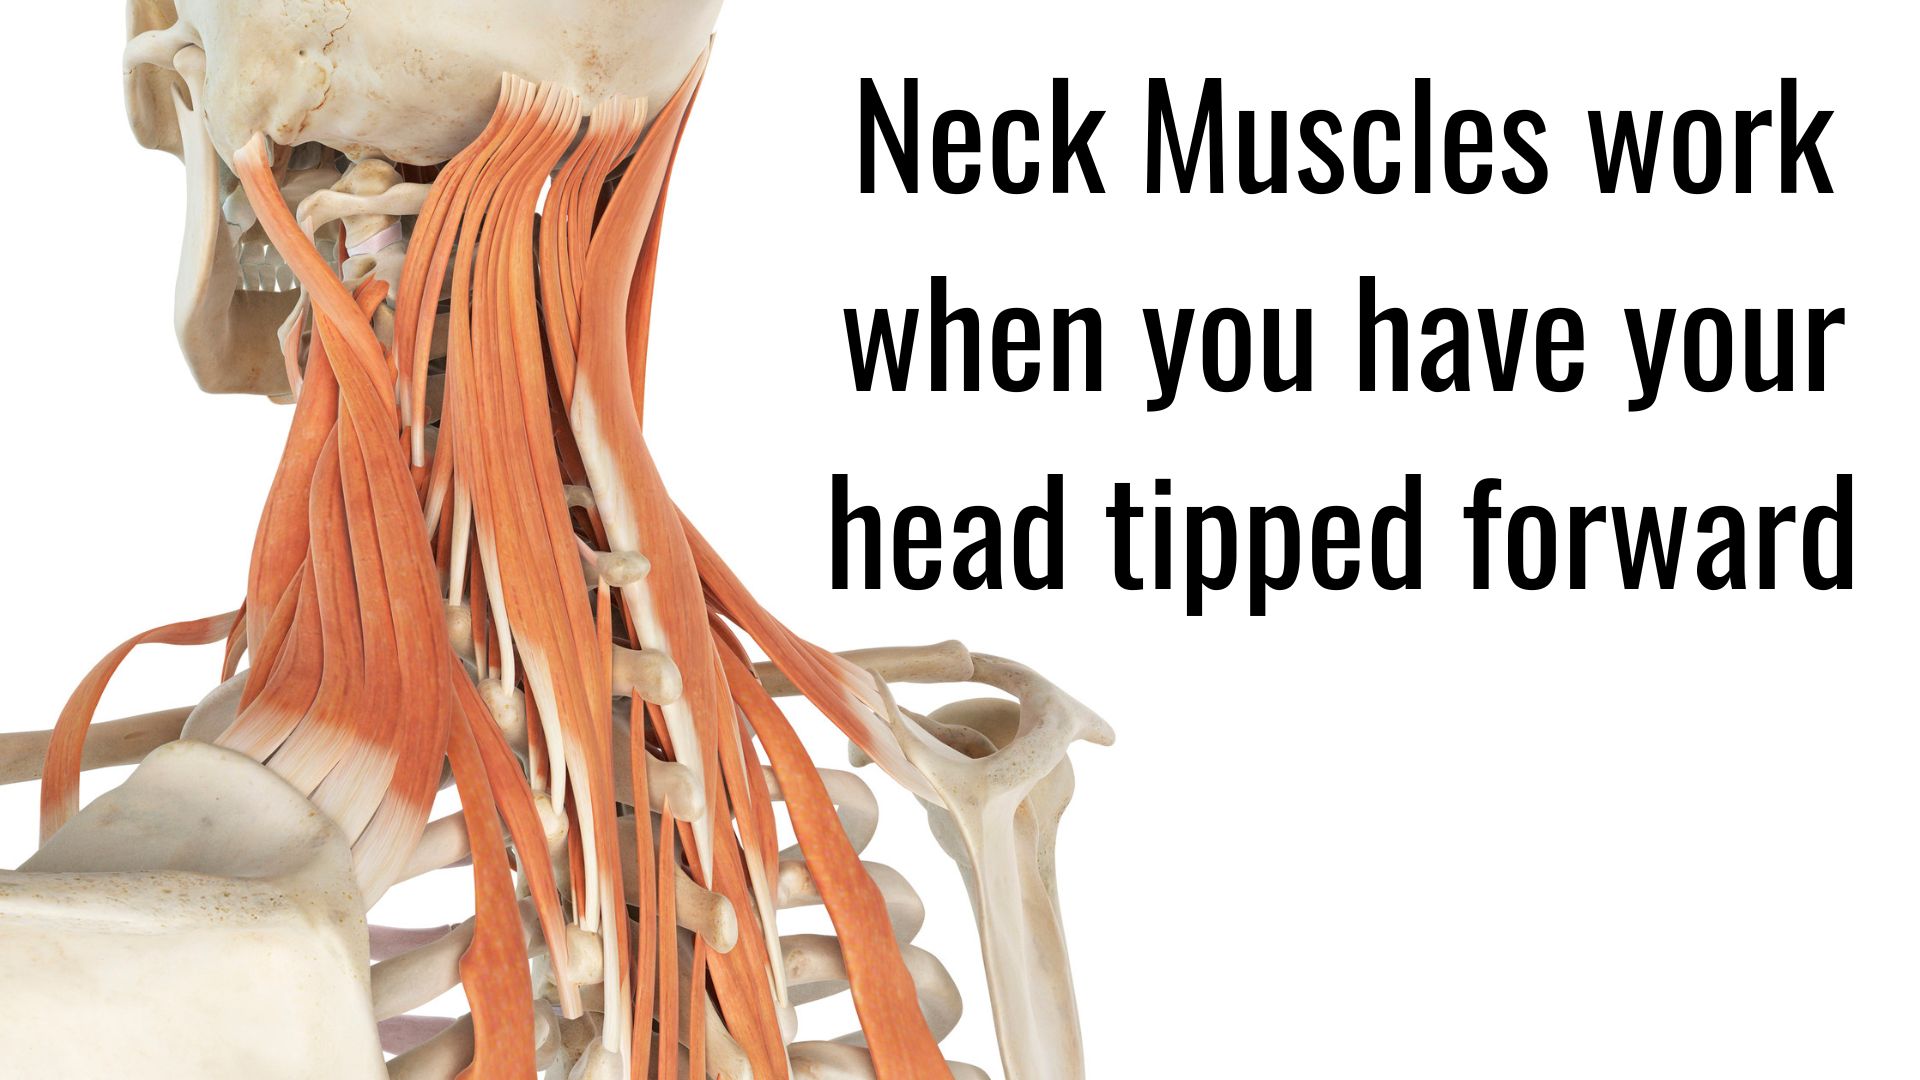 Neck hump neck muscles work hard when your head is tipped forward